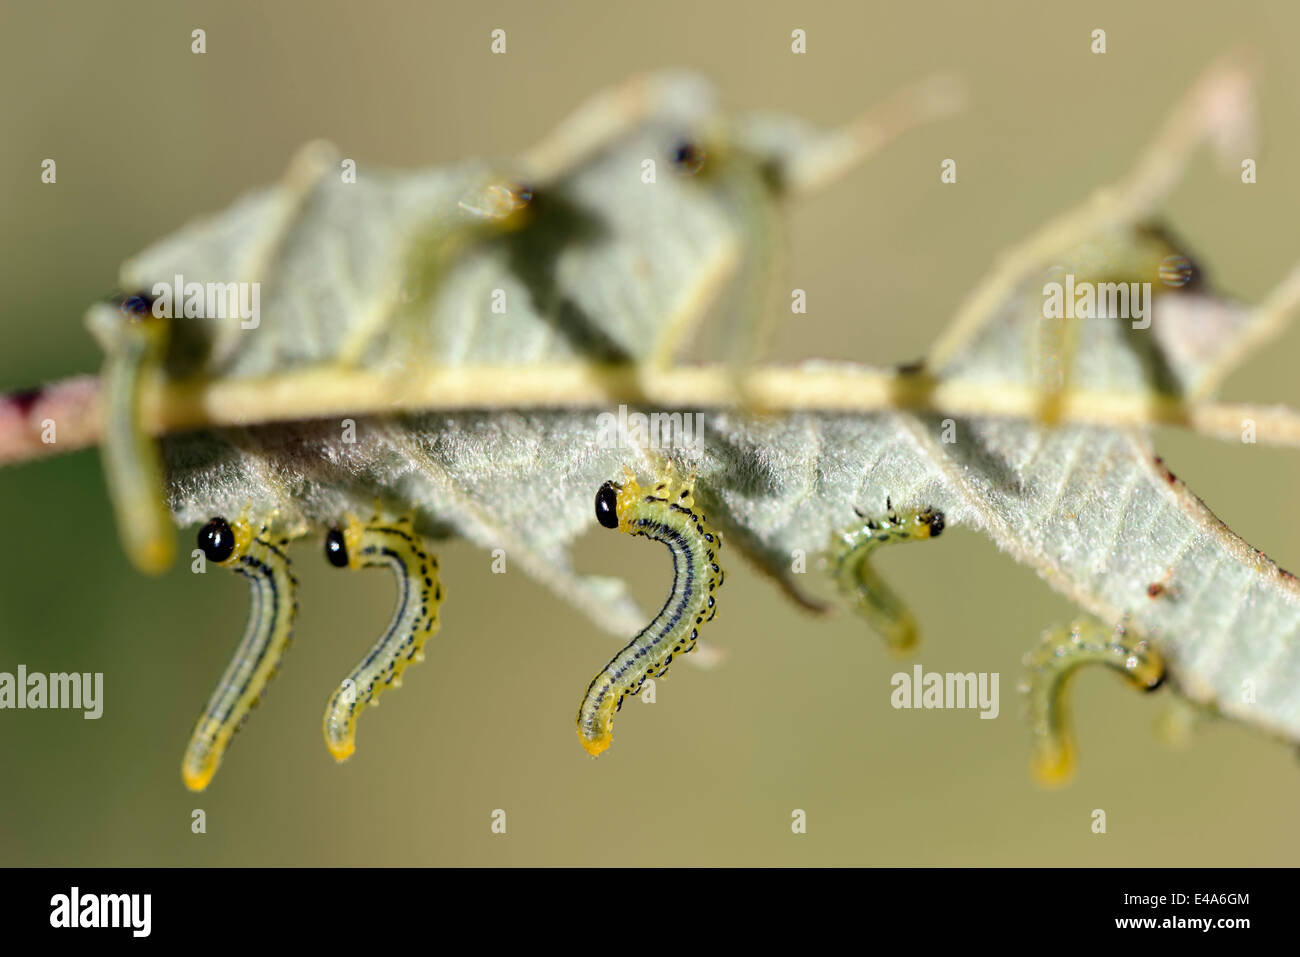 Grubs of hazel sawfly, Croesus septentrionalis, hanging on leftovers of leaf Stock Photo